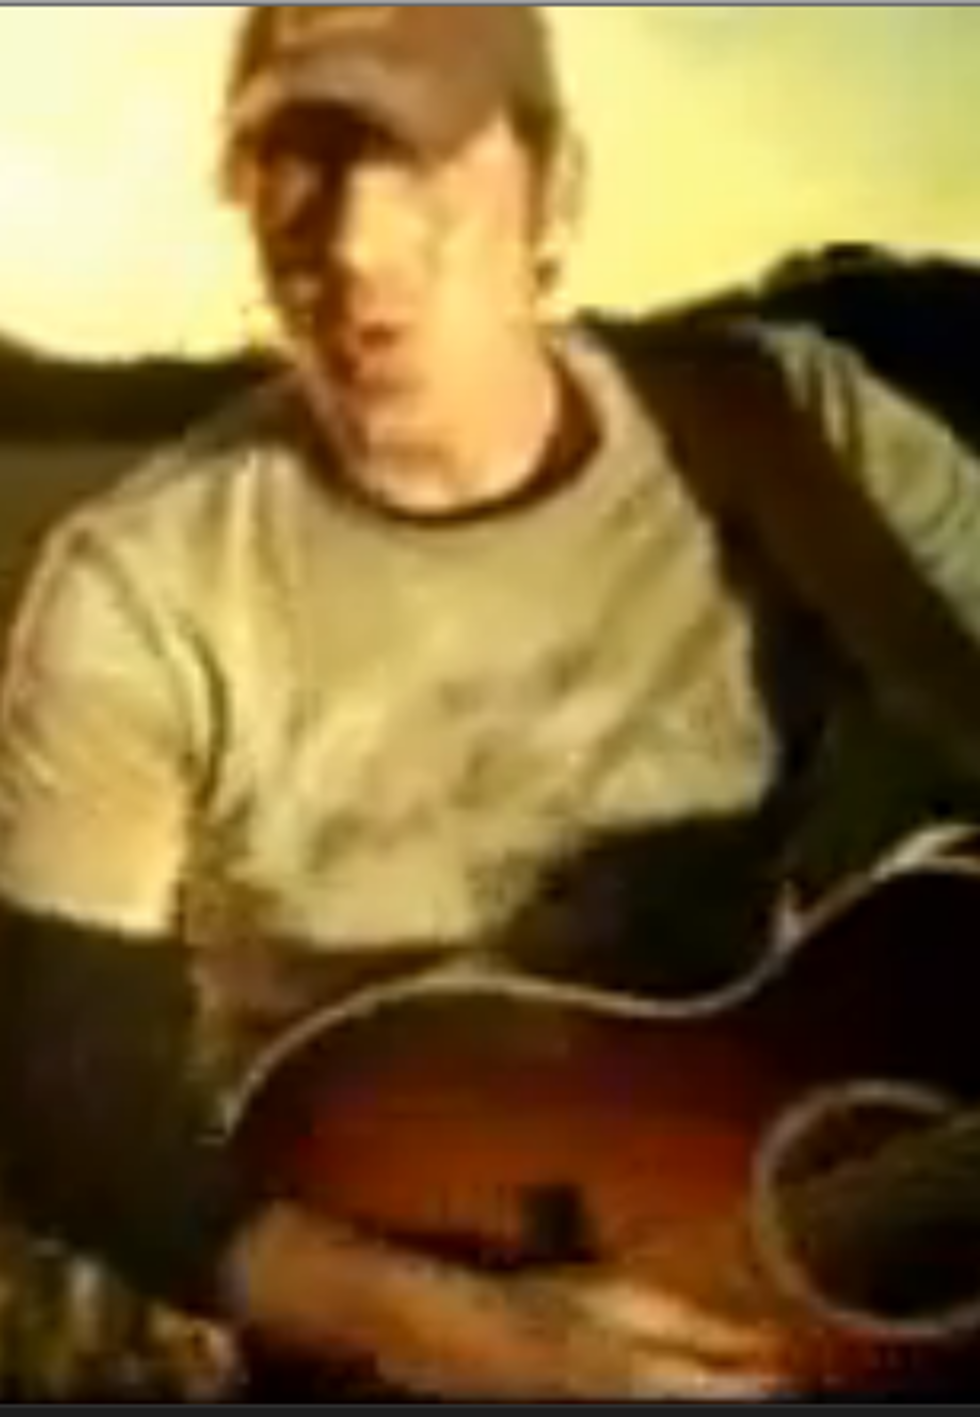 Rodney Atkins Number One Songs [VIDEO]